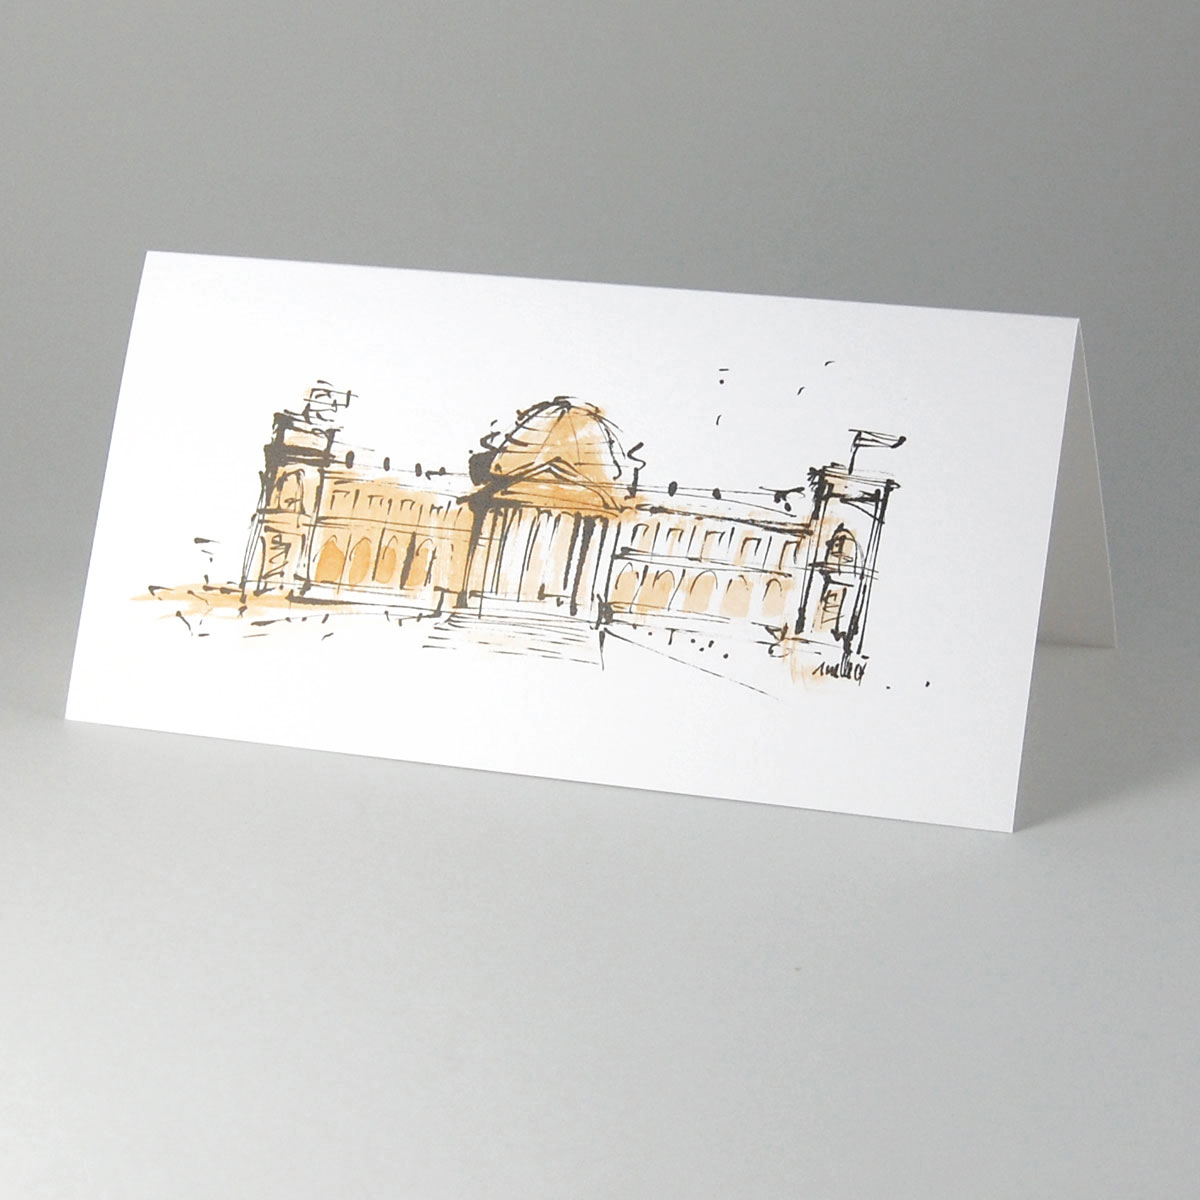 Greeting Cards: The Reichstag in Berlin which houses the Bundestag